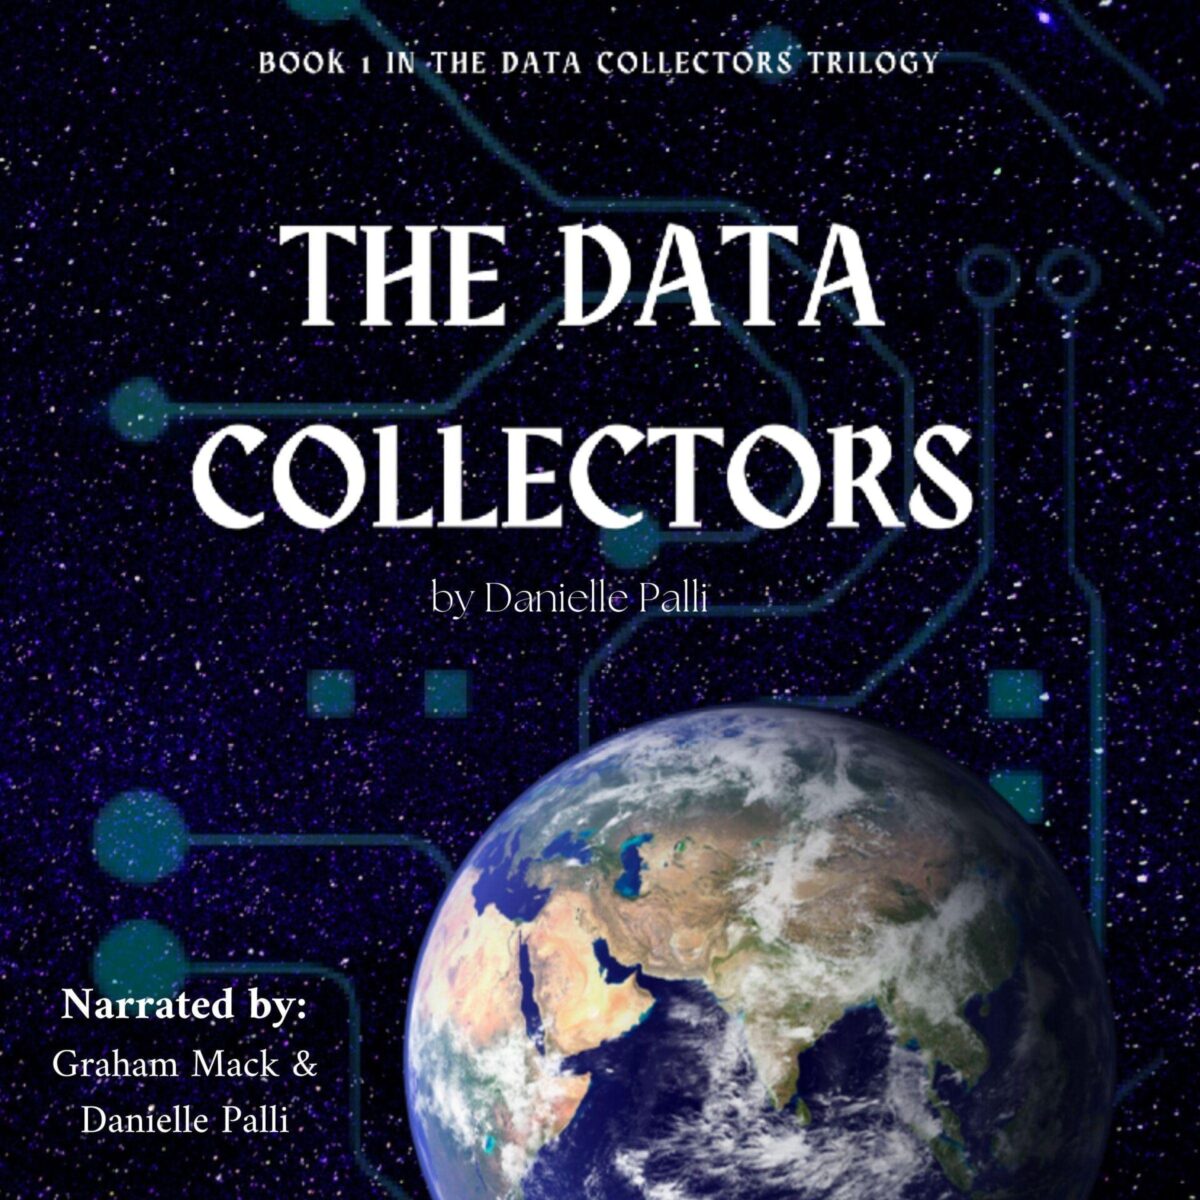 Interview with Danielle Palli – Author of The Data Collectors series